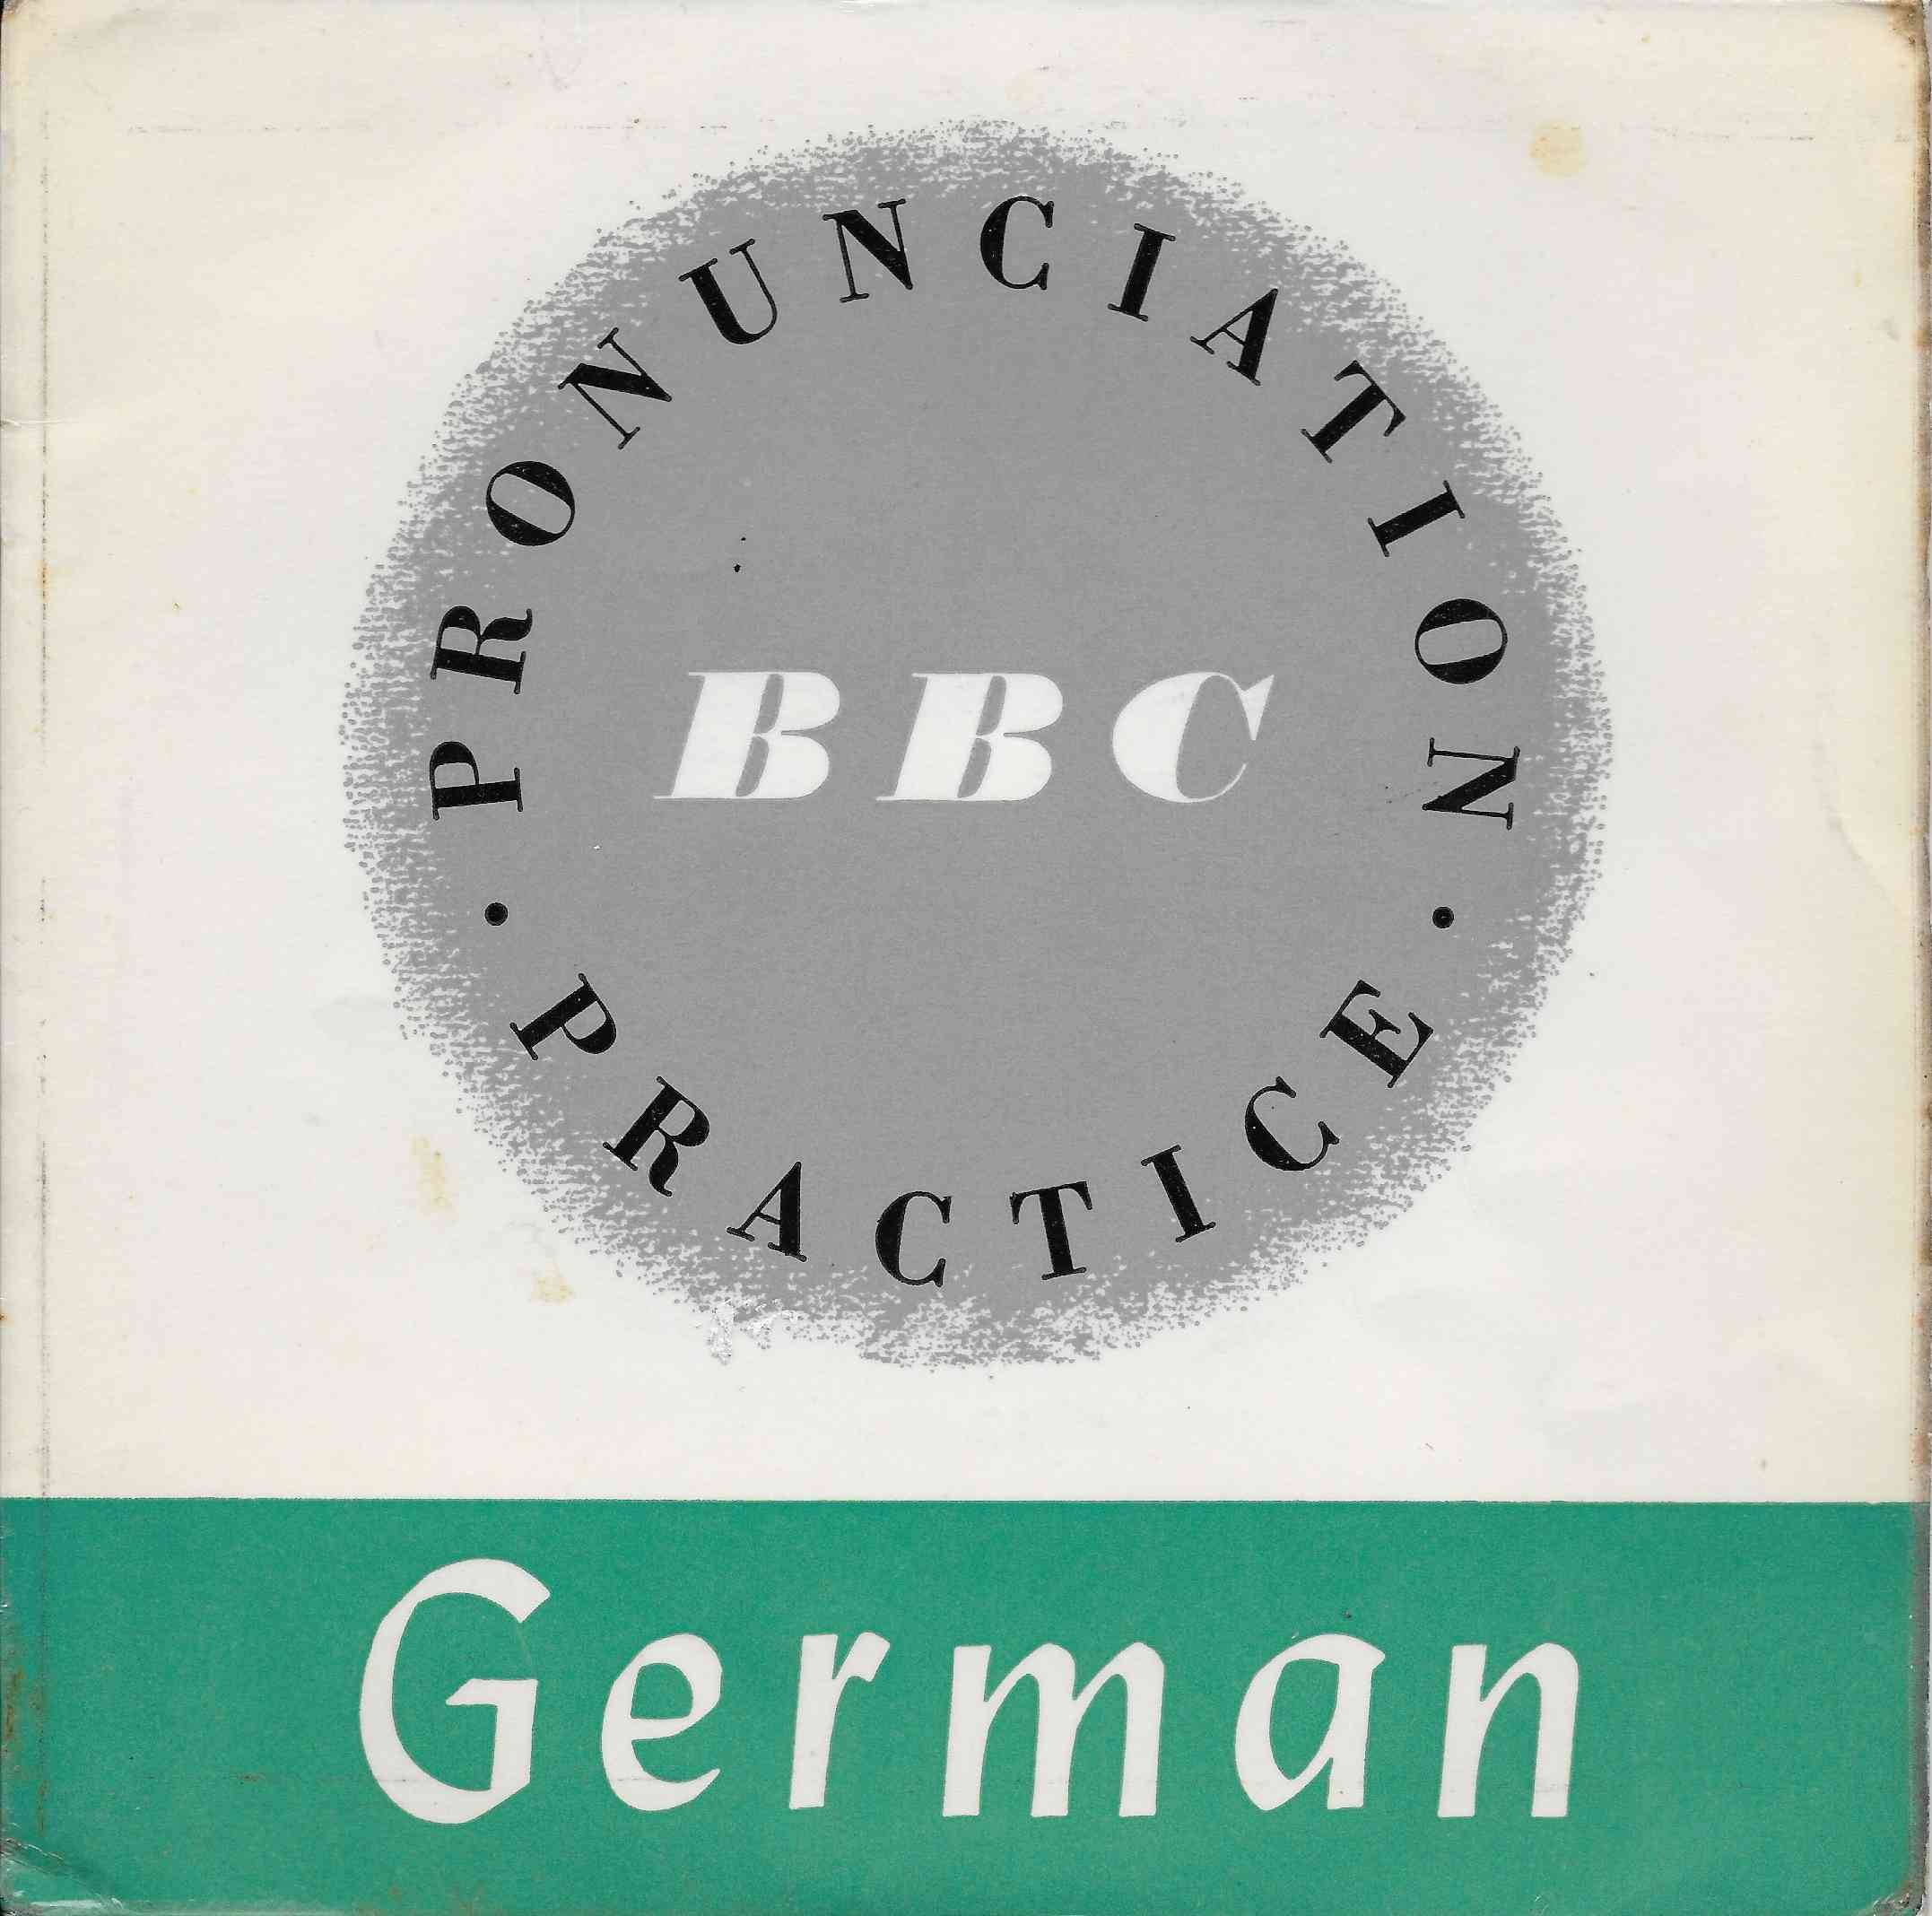 Picture of German by artist John L. M. Trim from the BBC singles - Records and Tapes library